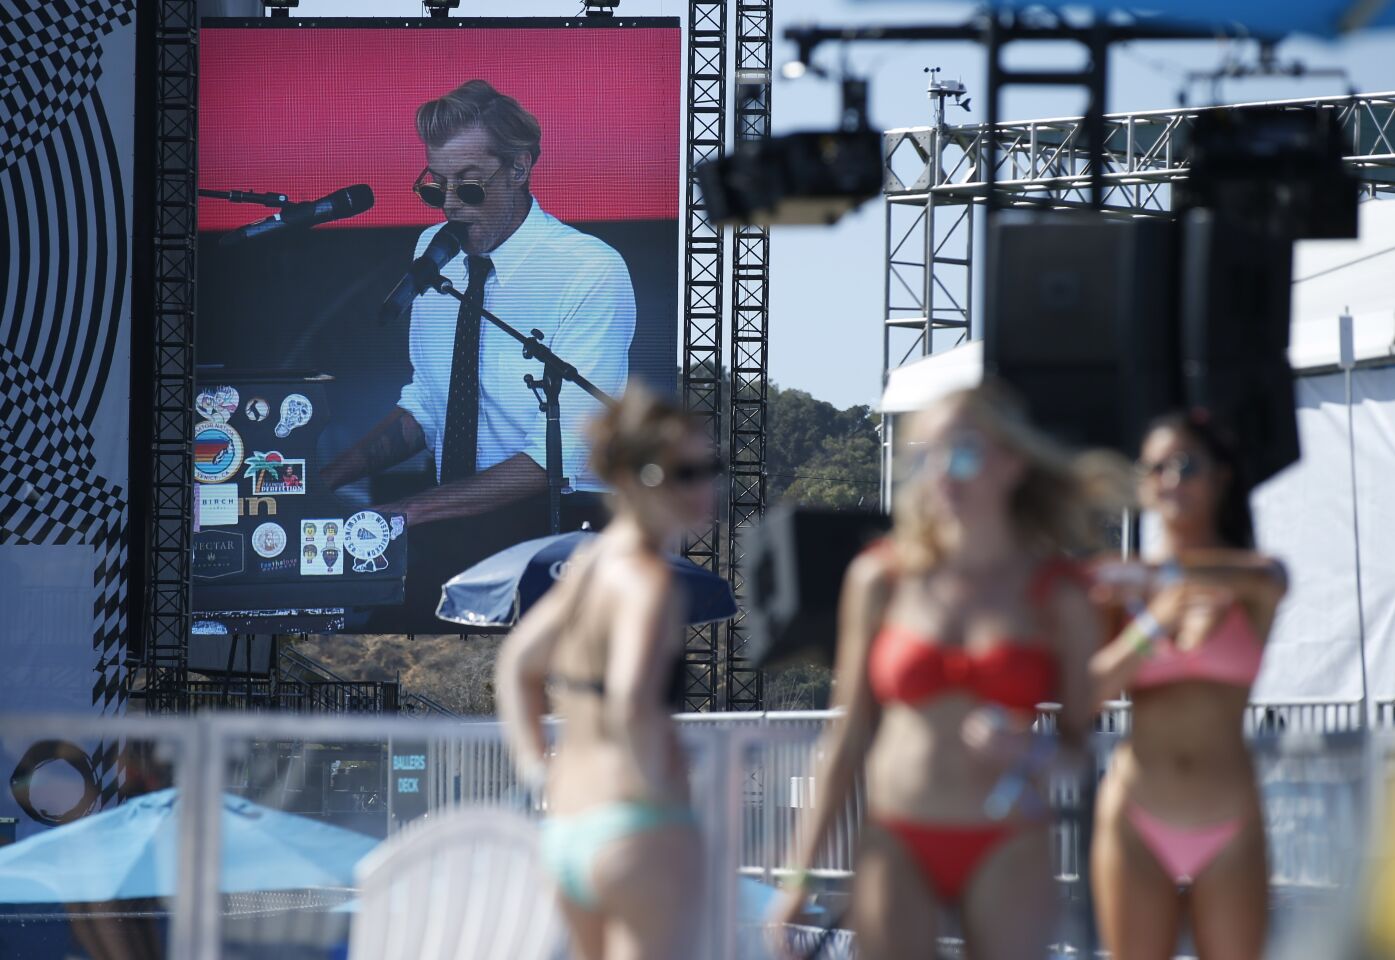 Andrew McMahon, shown on a screen, plays at the Sunset Cliff Stage as people get ready to go in a swimming pool at the Bask Swim Club at KAABOO Del Mar on Sept. 13, 2019.